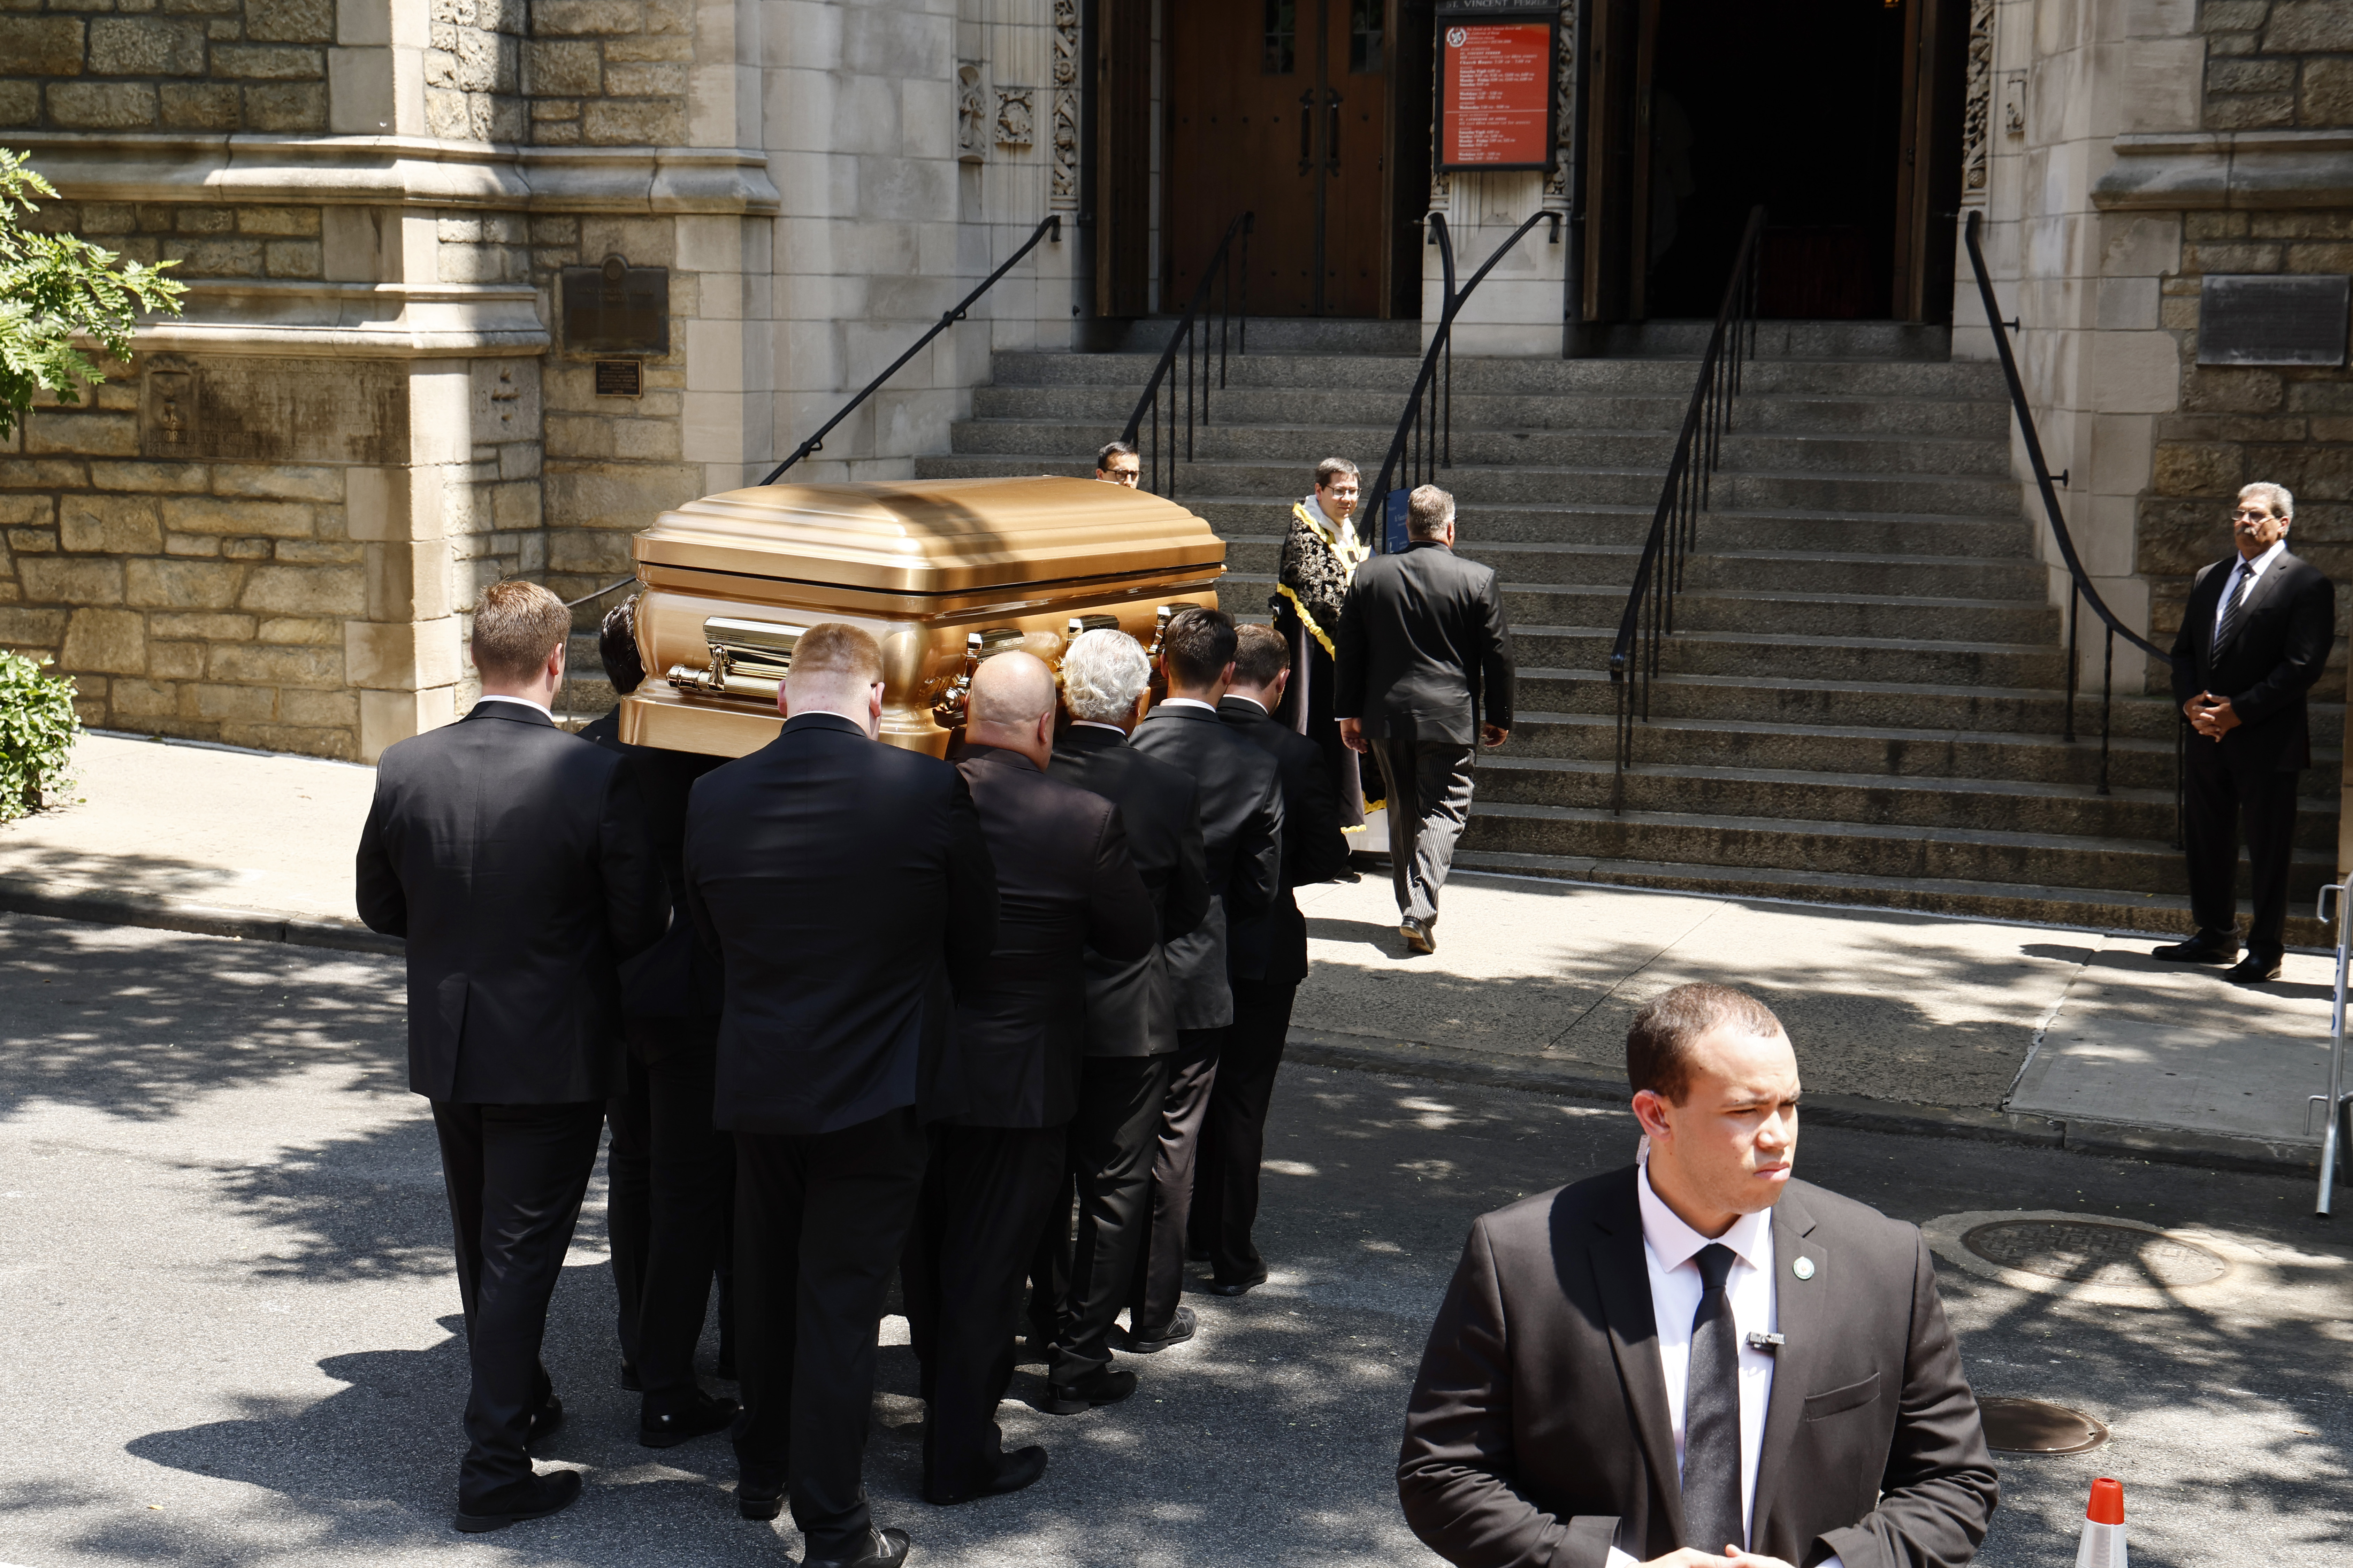 Ivana Trump mourned at Upper East Side funeral